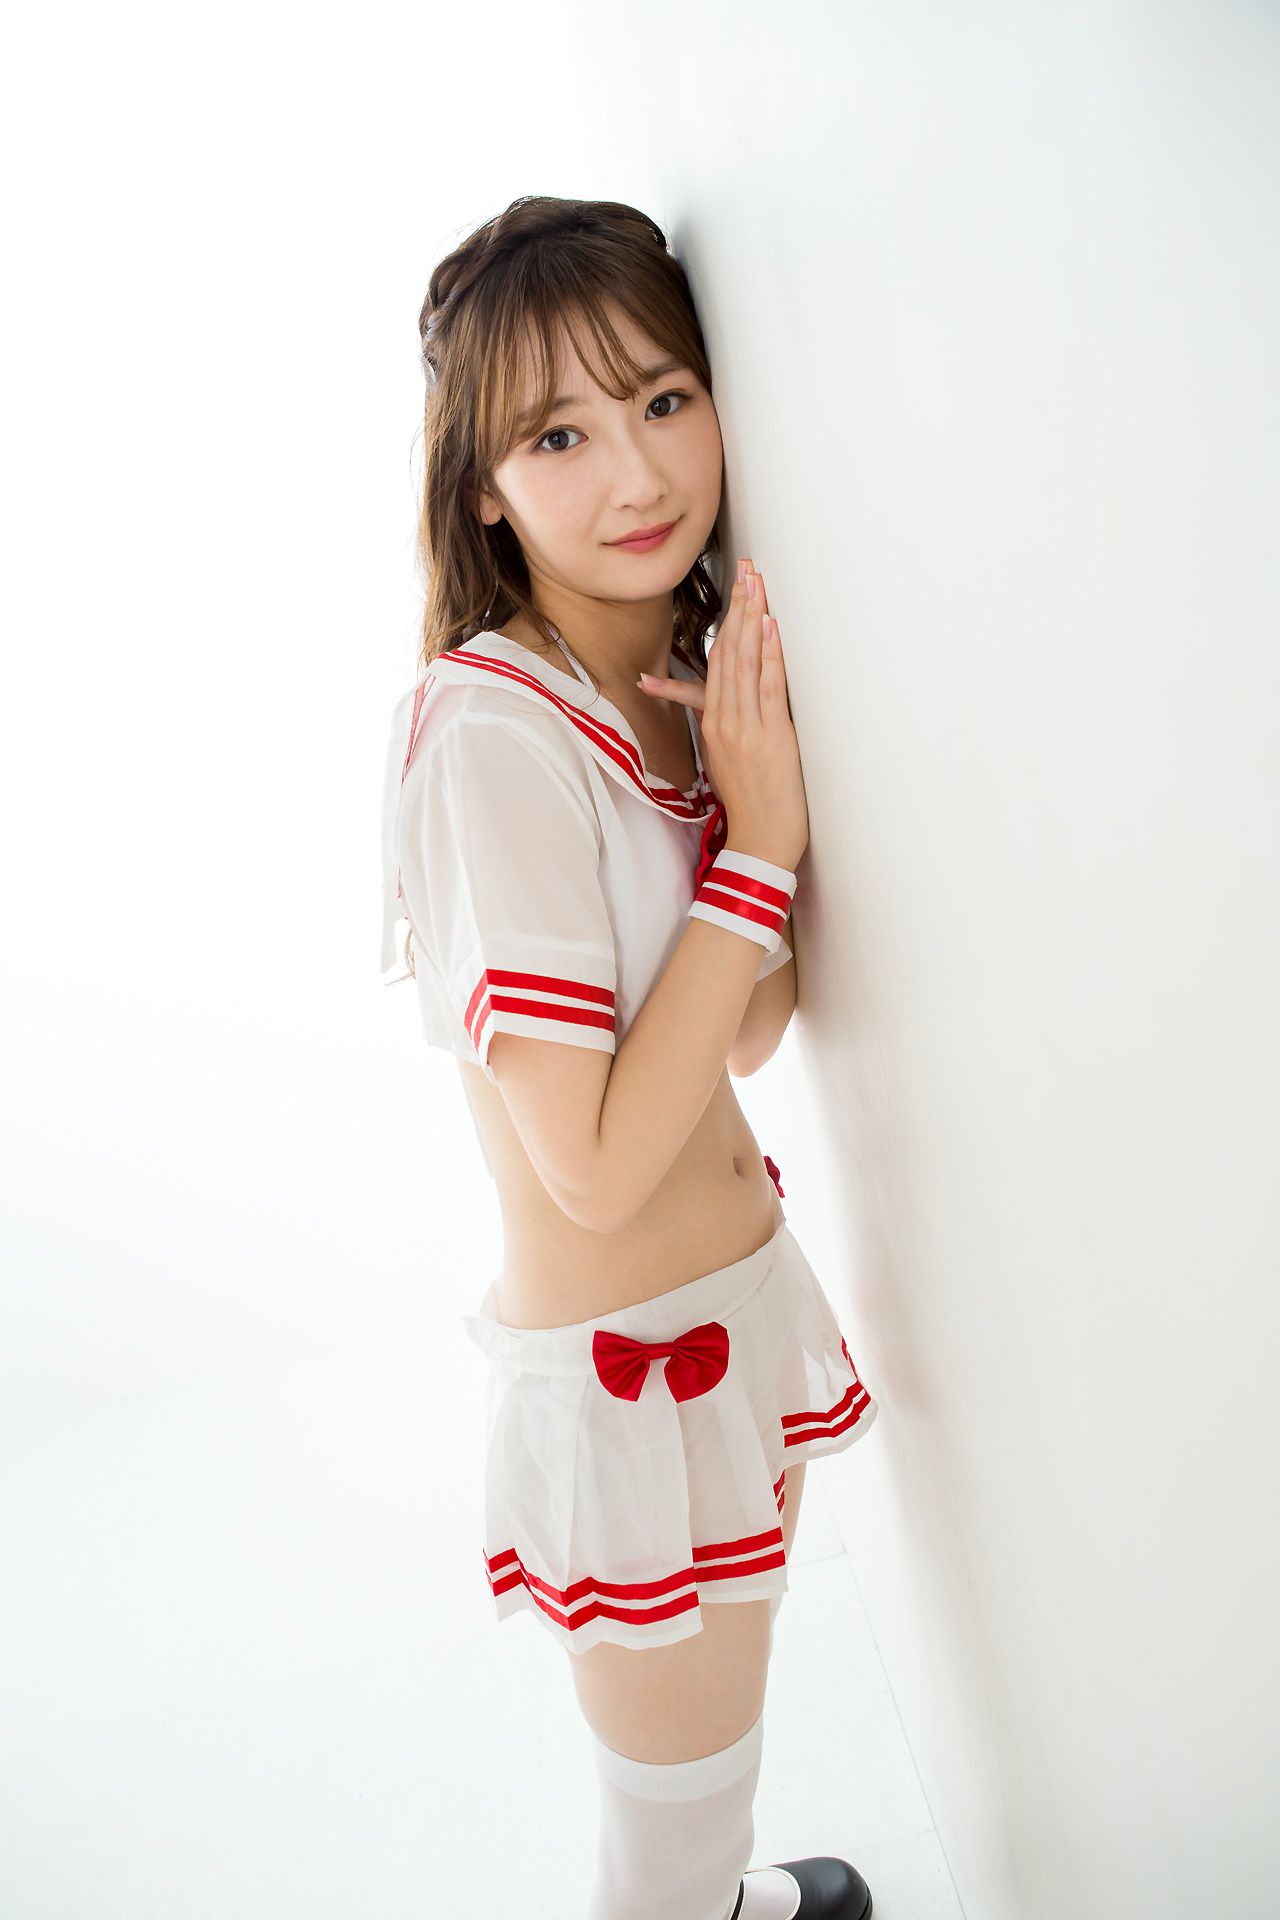 [Minisuka.tv] near the vine あ み み – Special Gallery 6.3